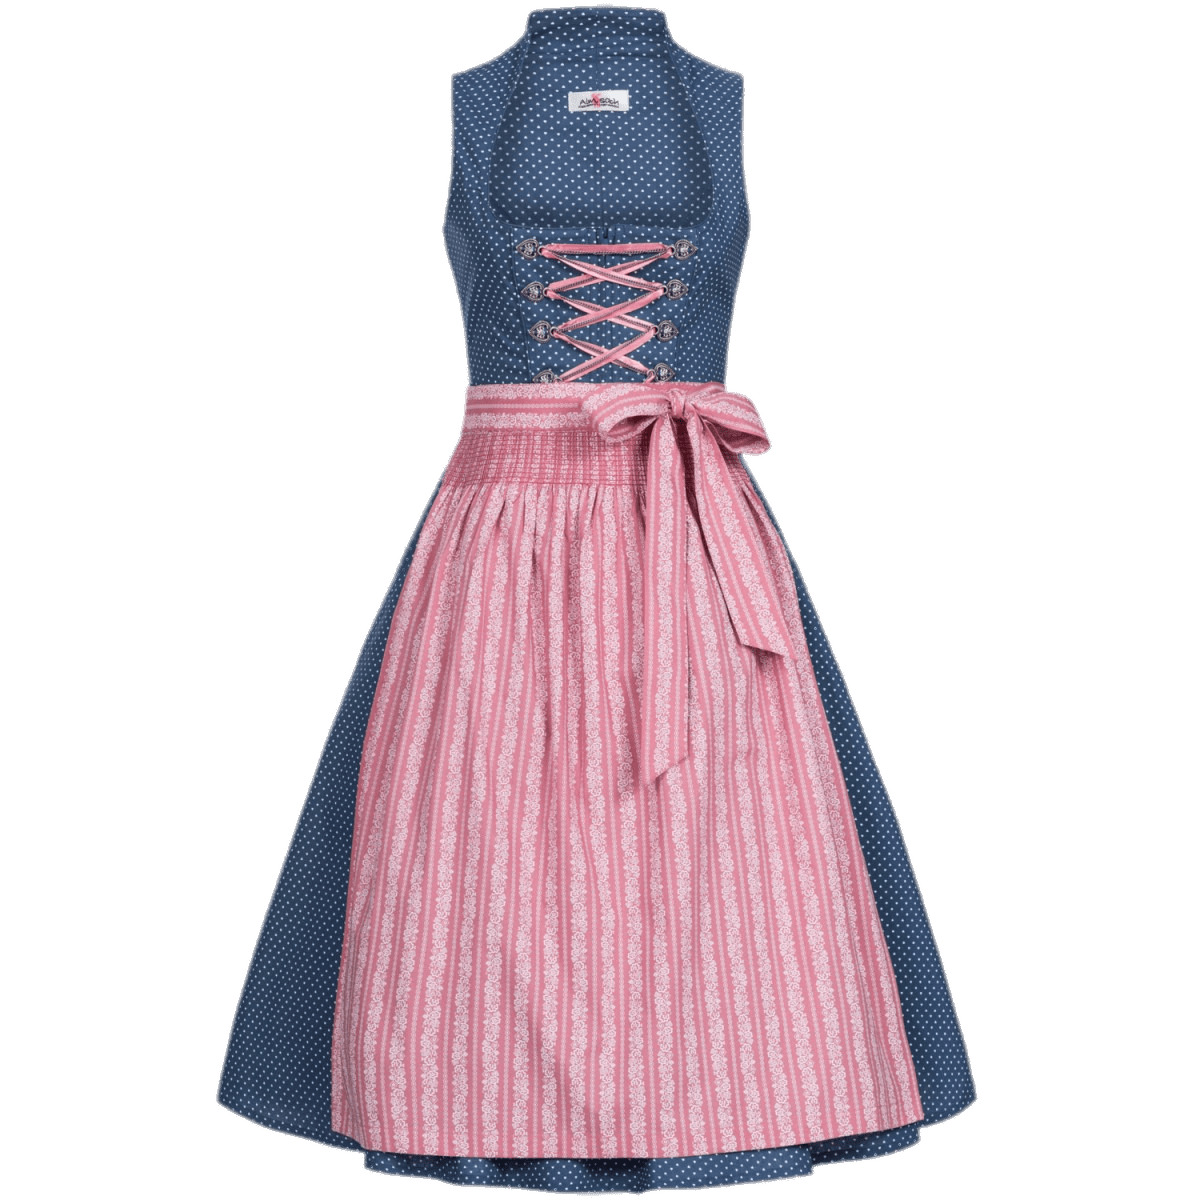 Blue and Pink Dirndl Dress icons